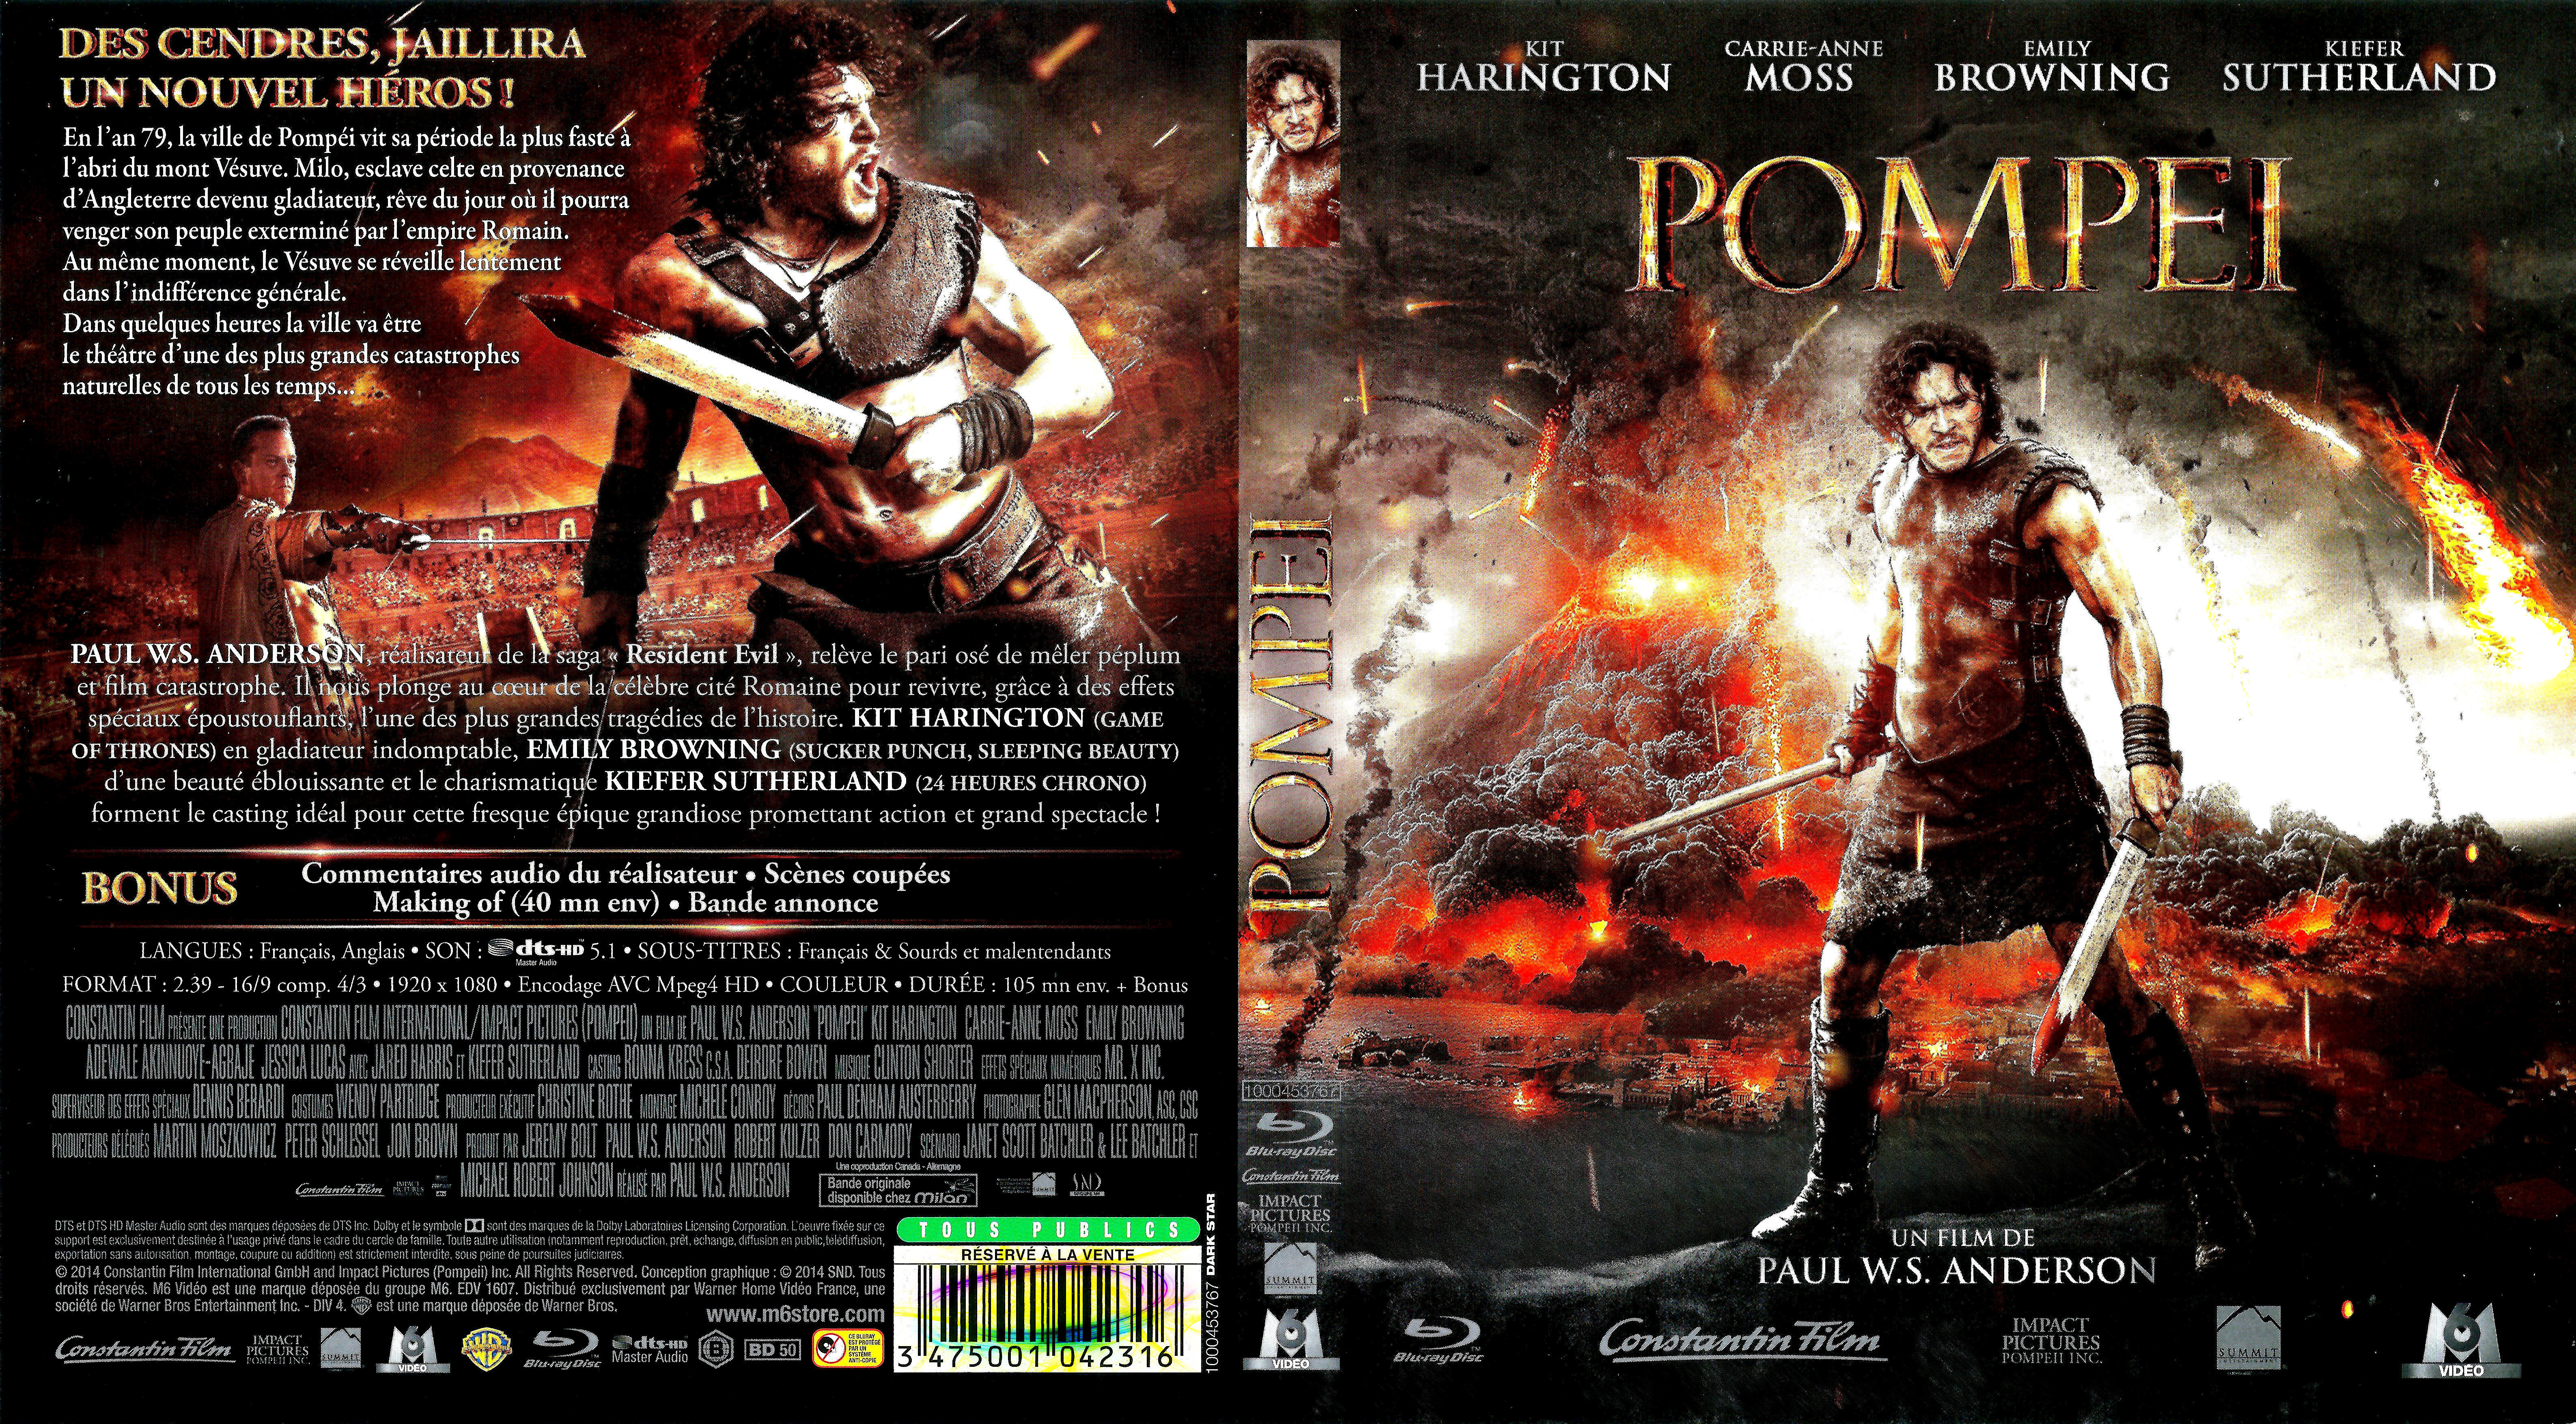 Jaquette DVD Pompi (BLU-RAY)